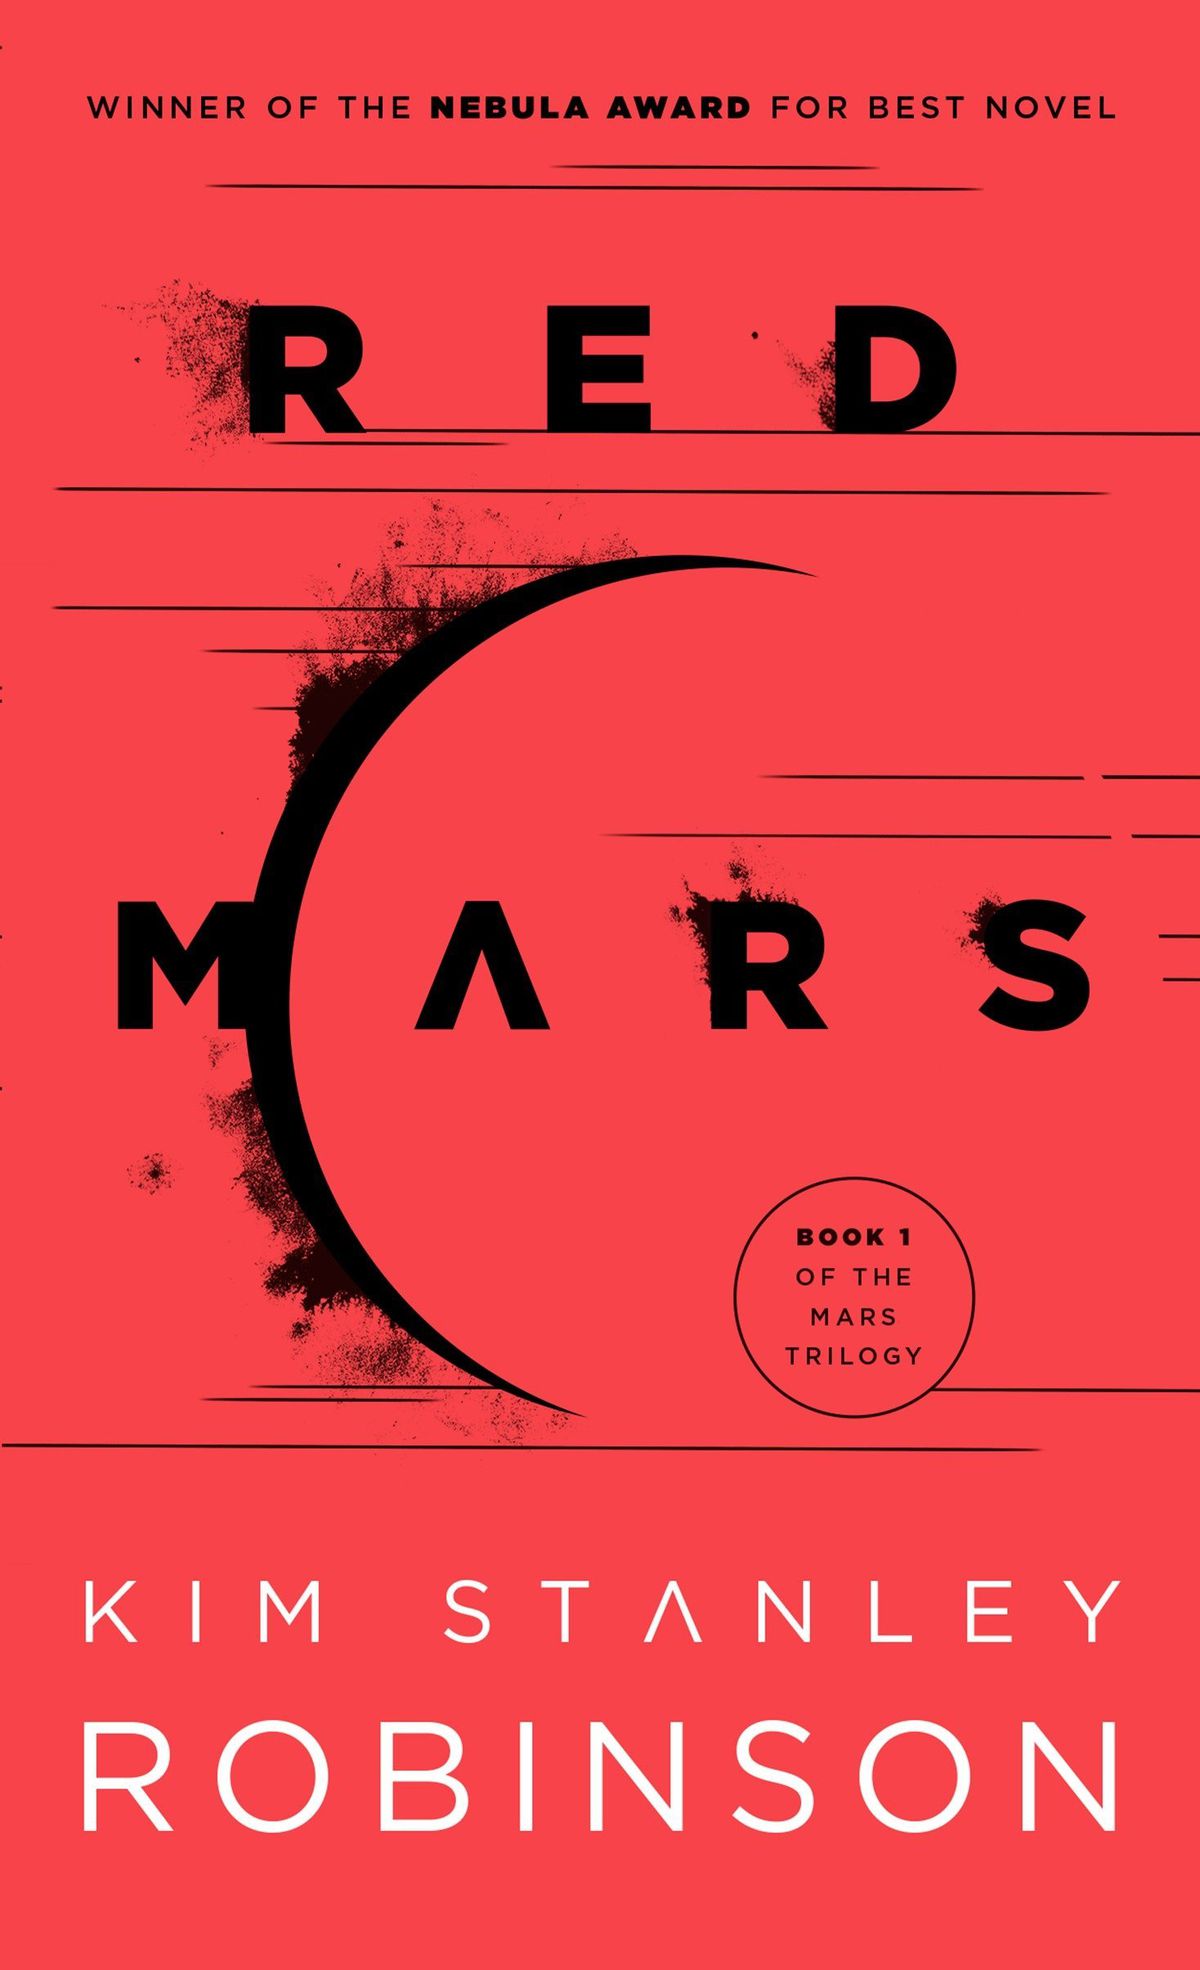 The cover of Kim Stanley Robinson’s Red Mars